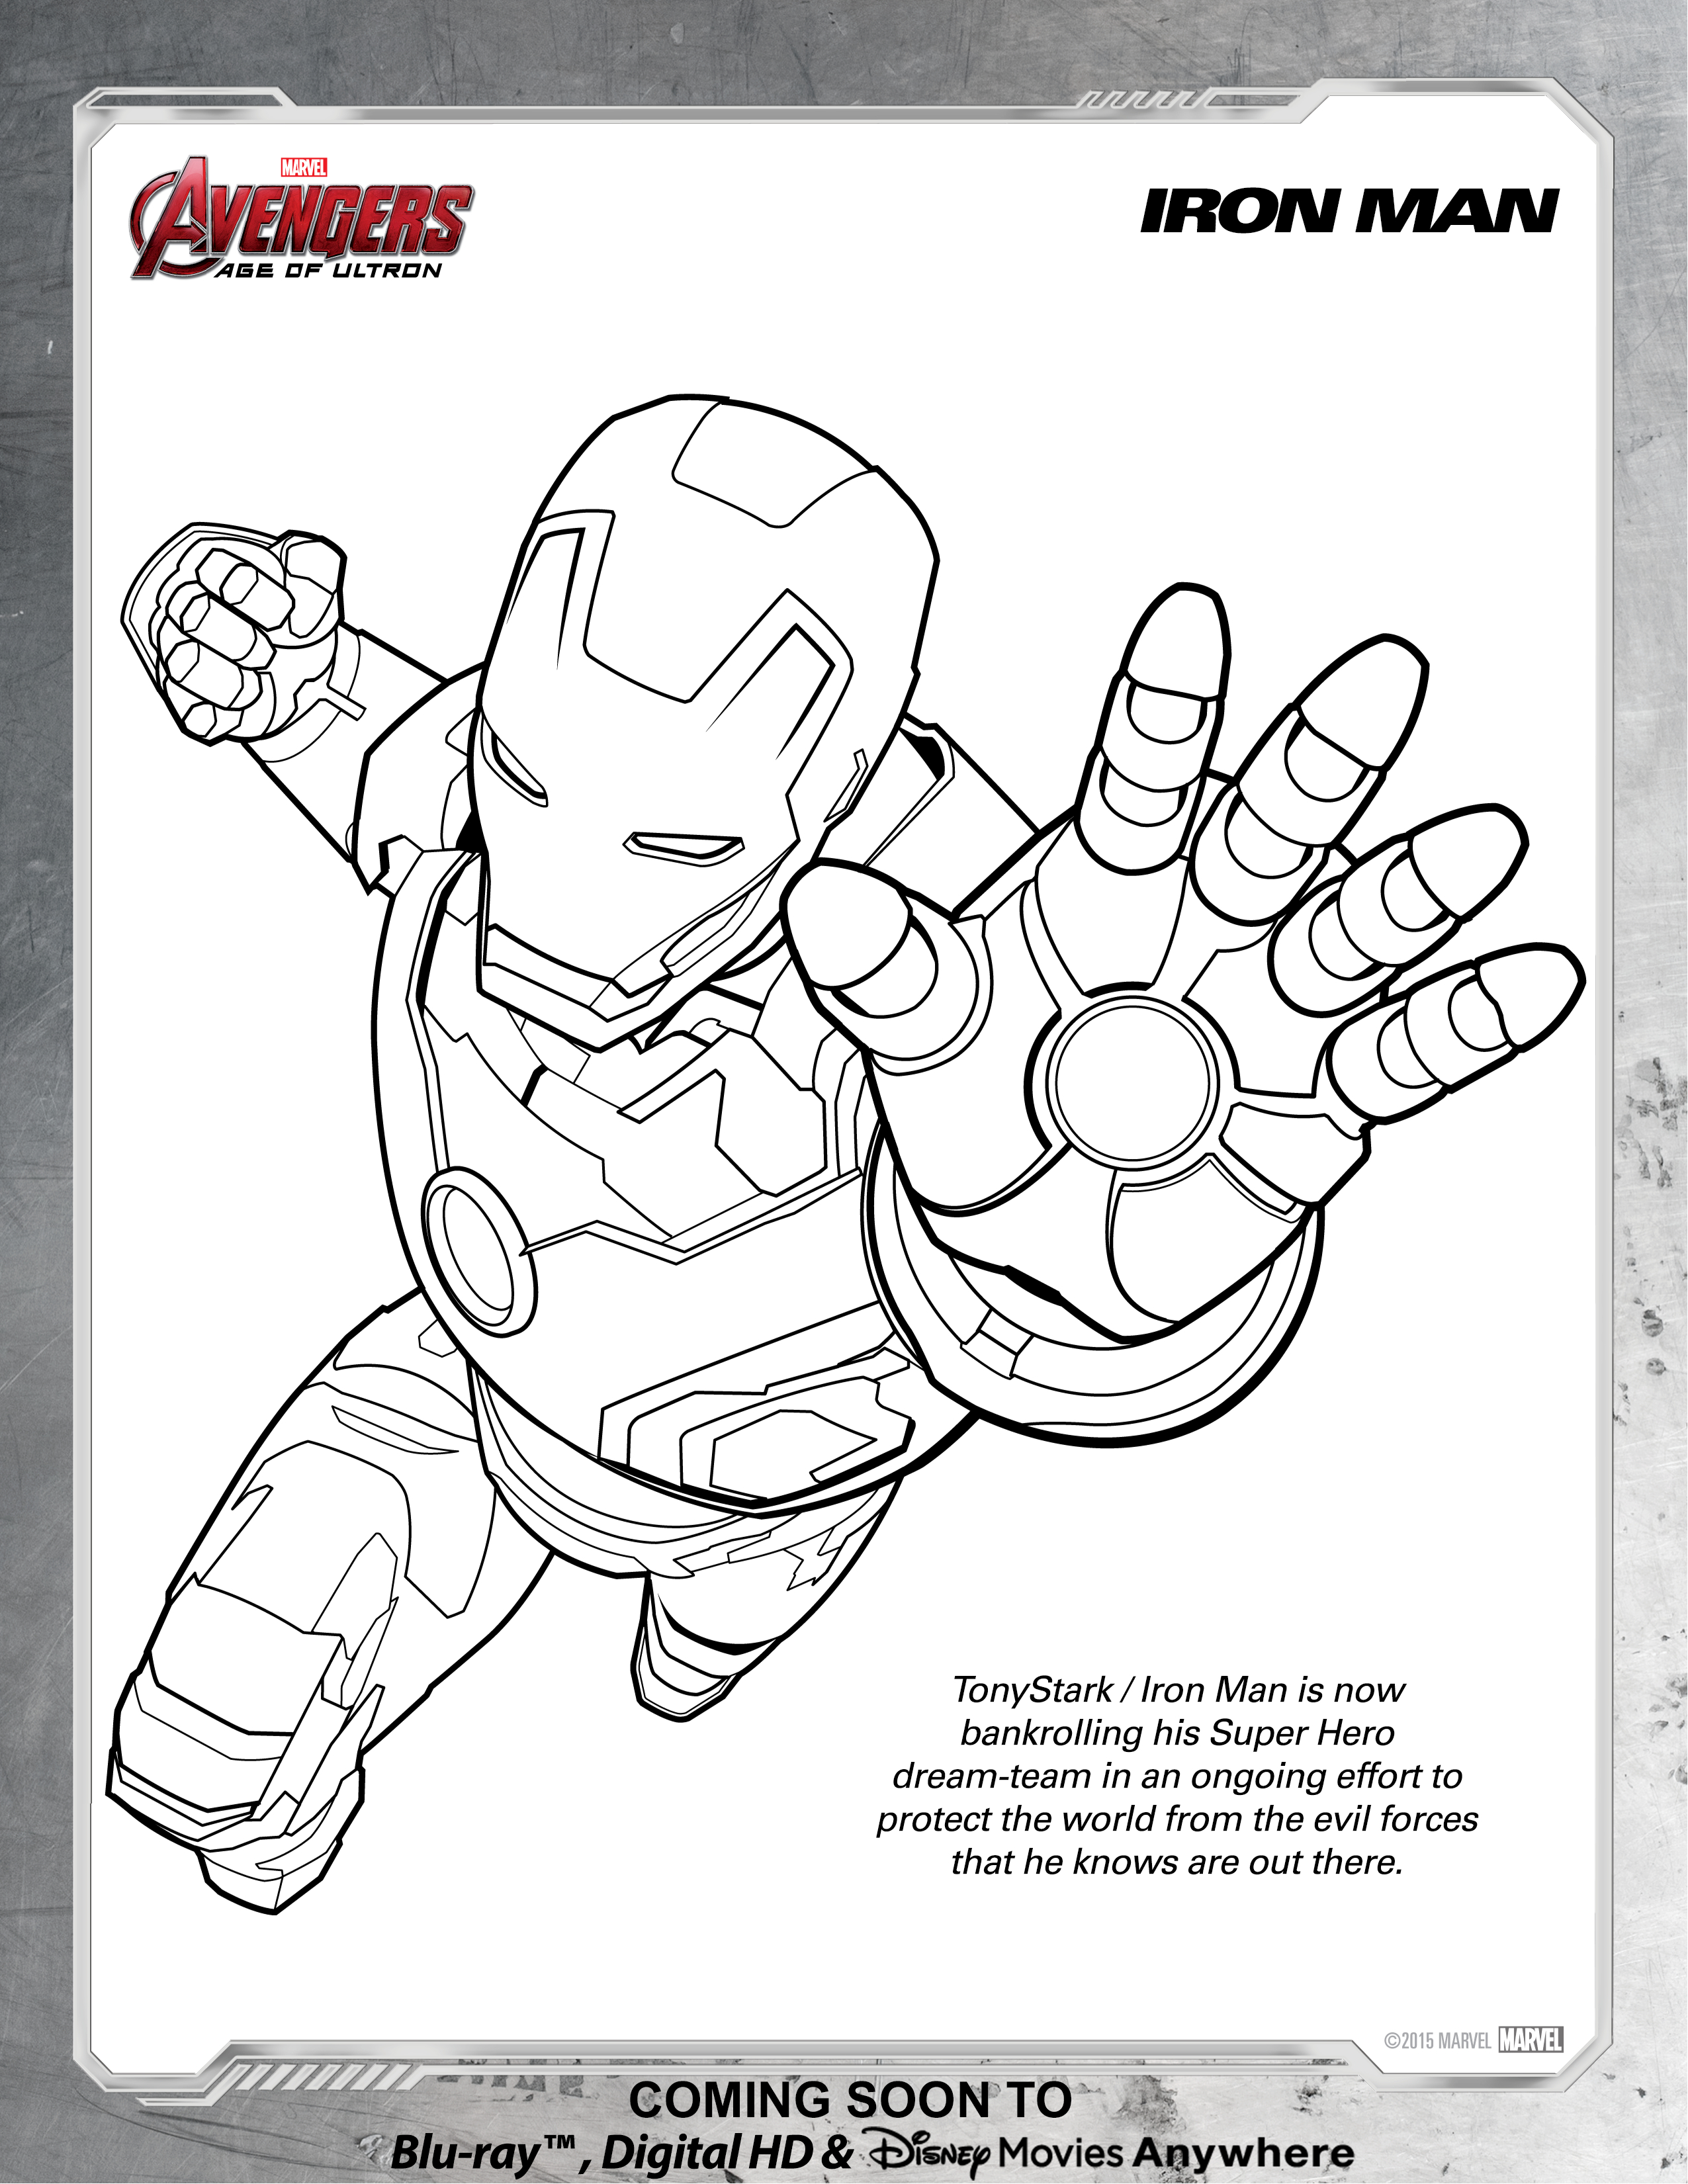 Printable Ironman Coloring Pages Avengers Iron Man Coloring Page Disney Movies